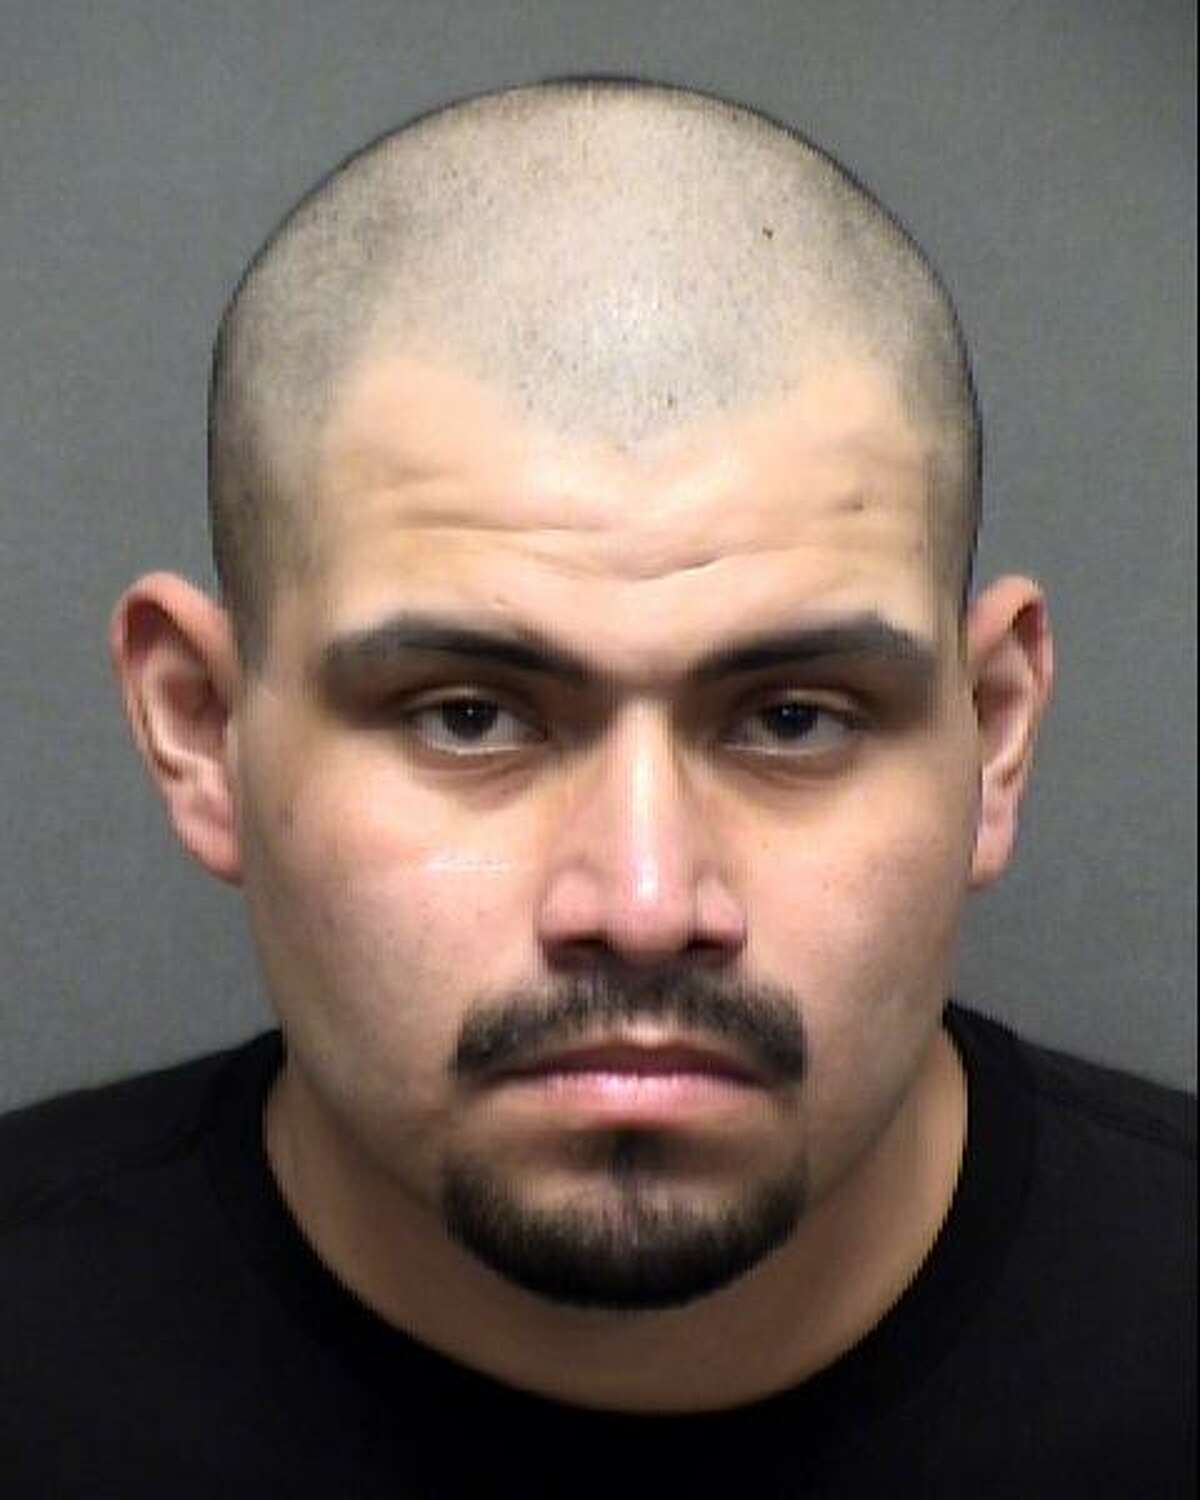 Justin Anthony Gonzales was 27 when he was arrested in July 2019 and charged with aggravated sexual assault of a child, according to Bexar County court records. On Monday, Gonzales, now 29, was sentenced to 20 years in prison.